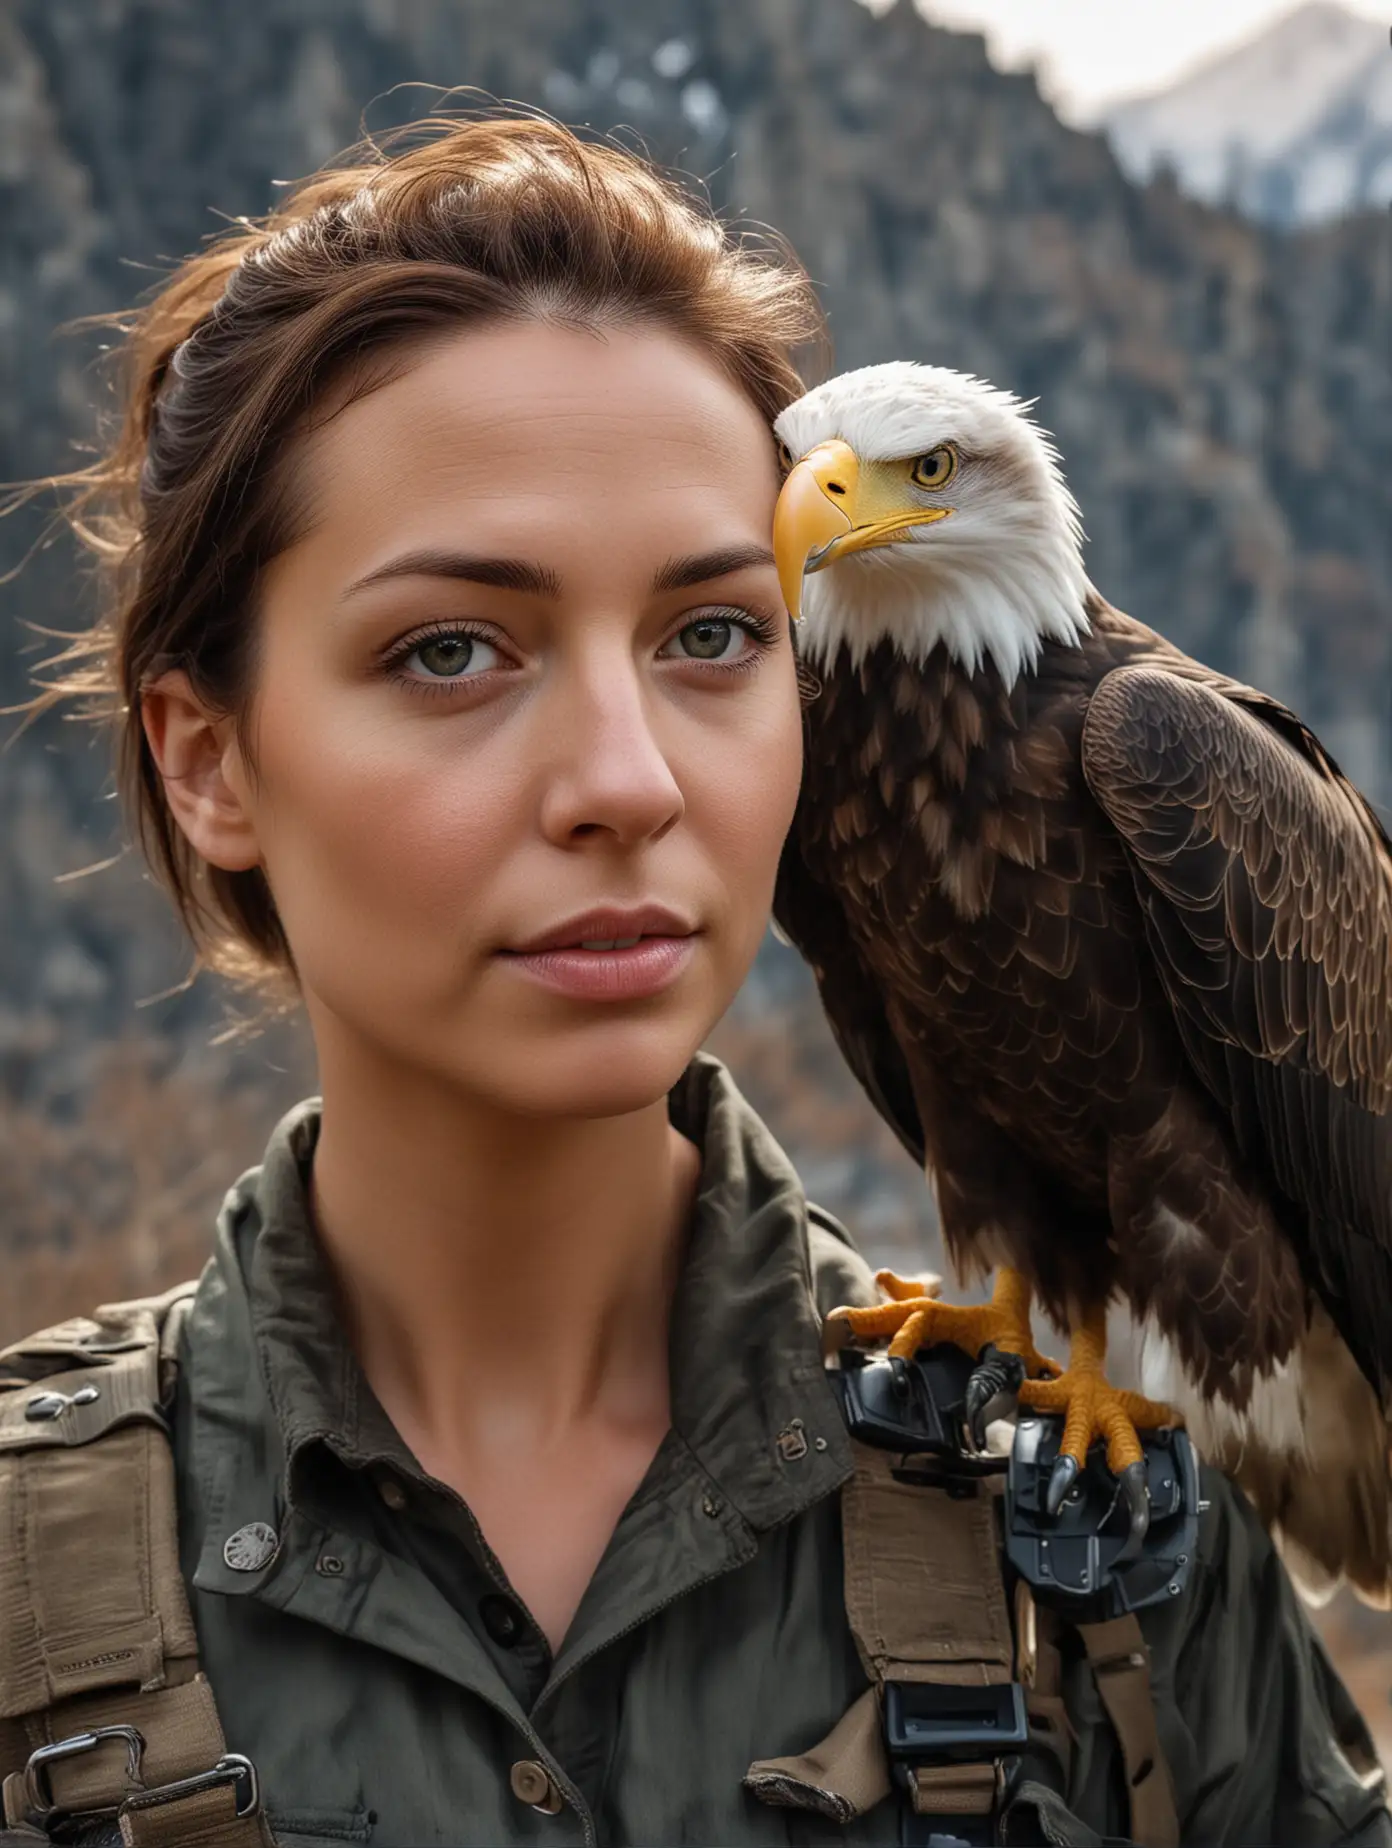 A beautiful woman takes a photo with a bald eagle, exquisite facial features outdoors, facing the camera, professional photography techniques, full body portrait